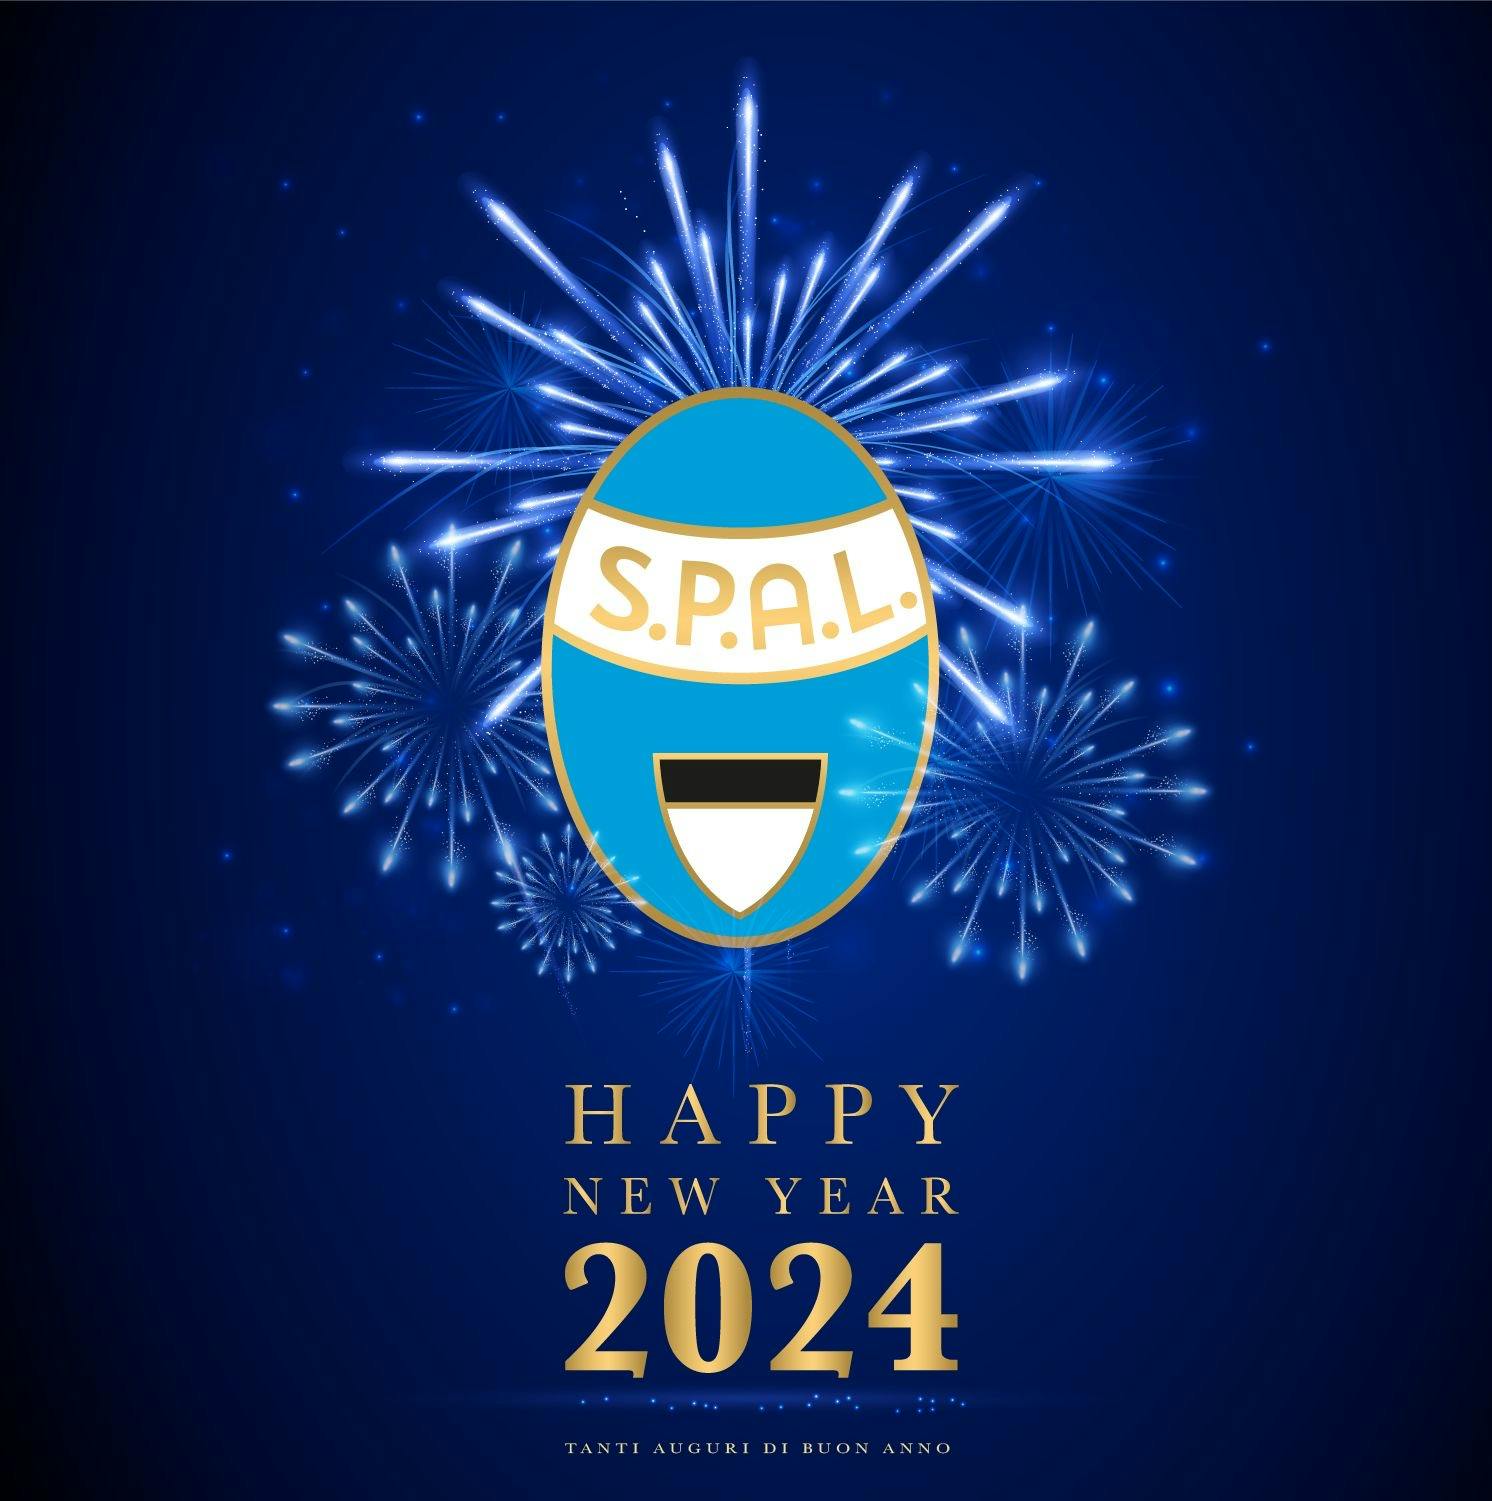 Happy New Year from SPAL